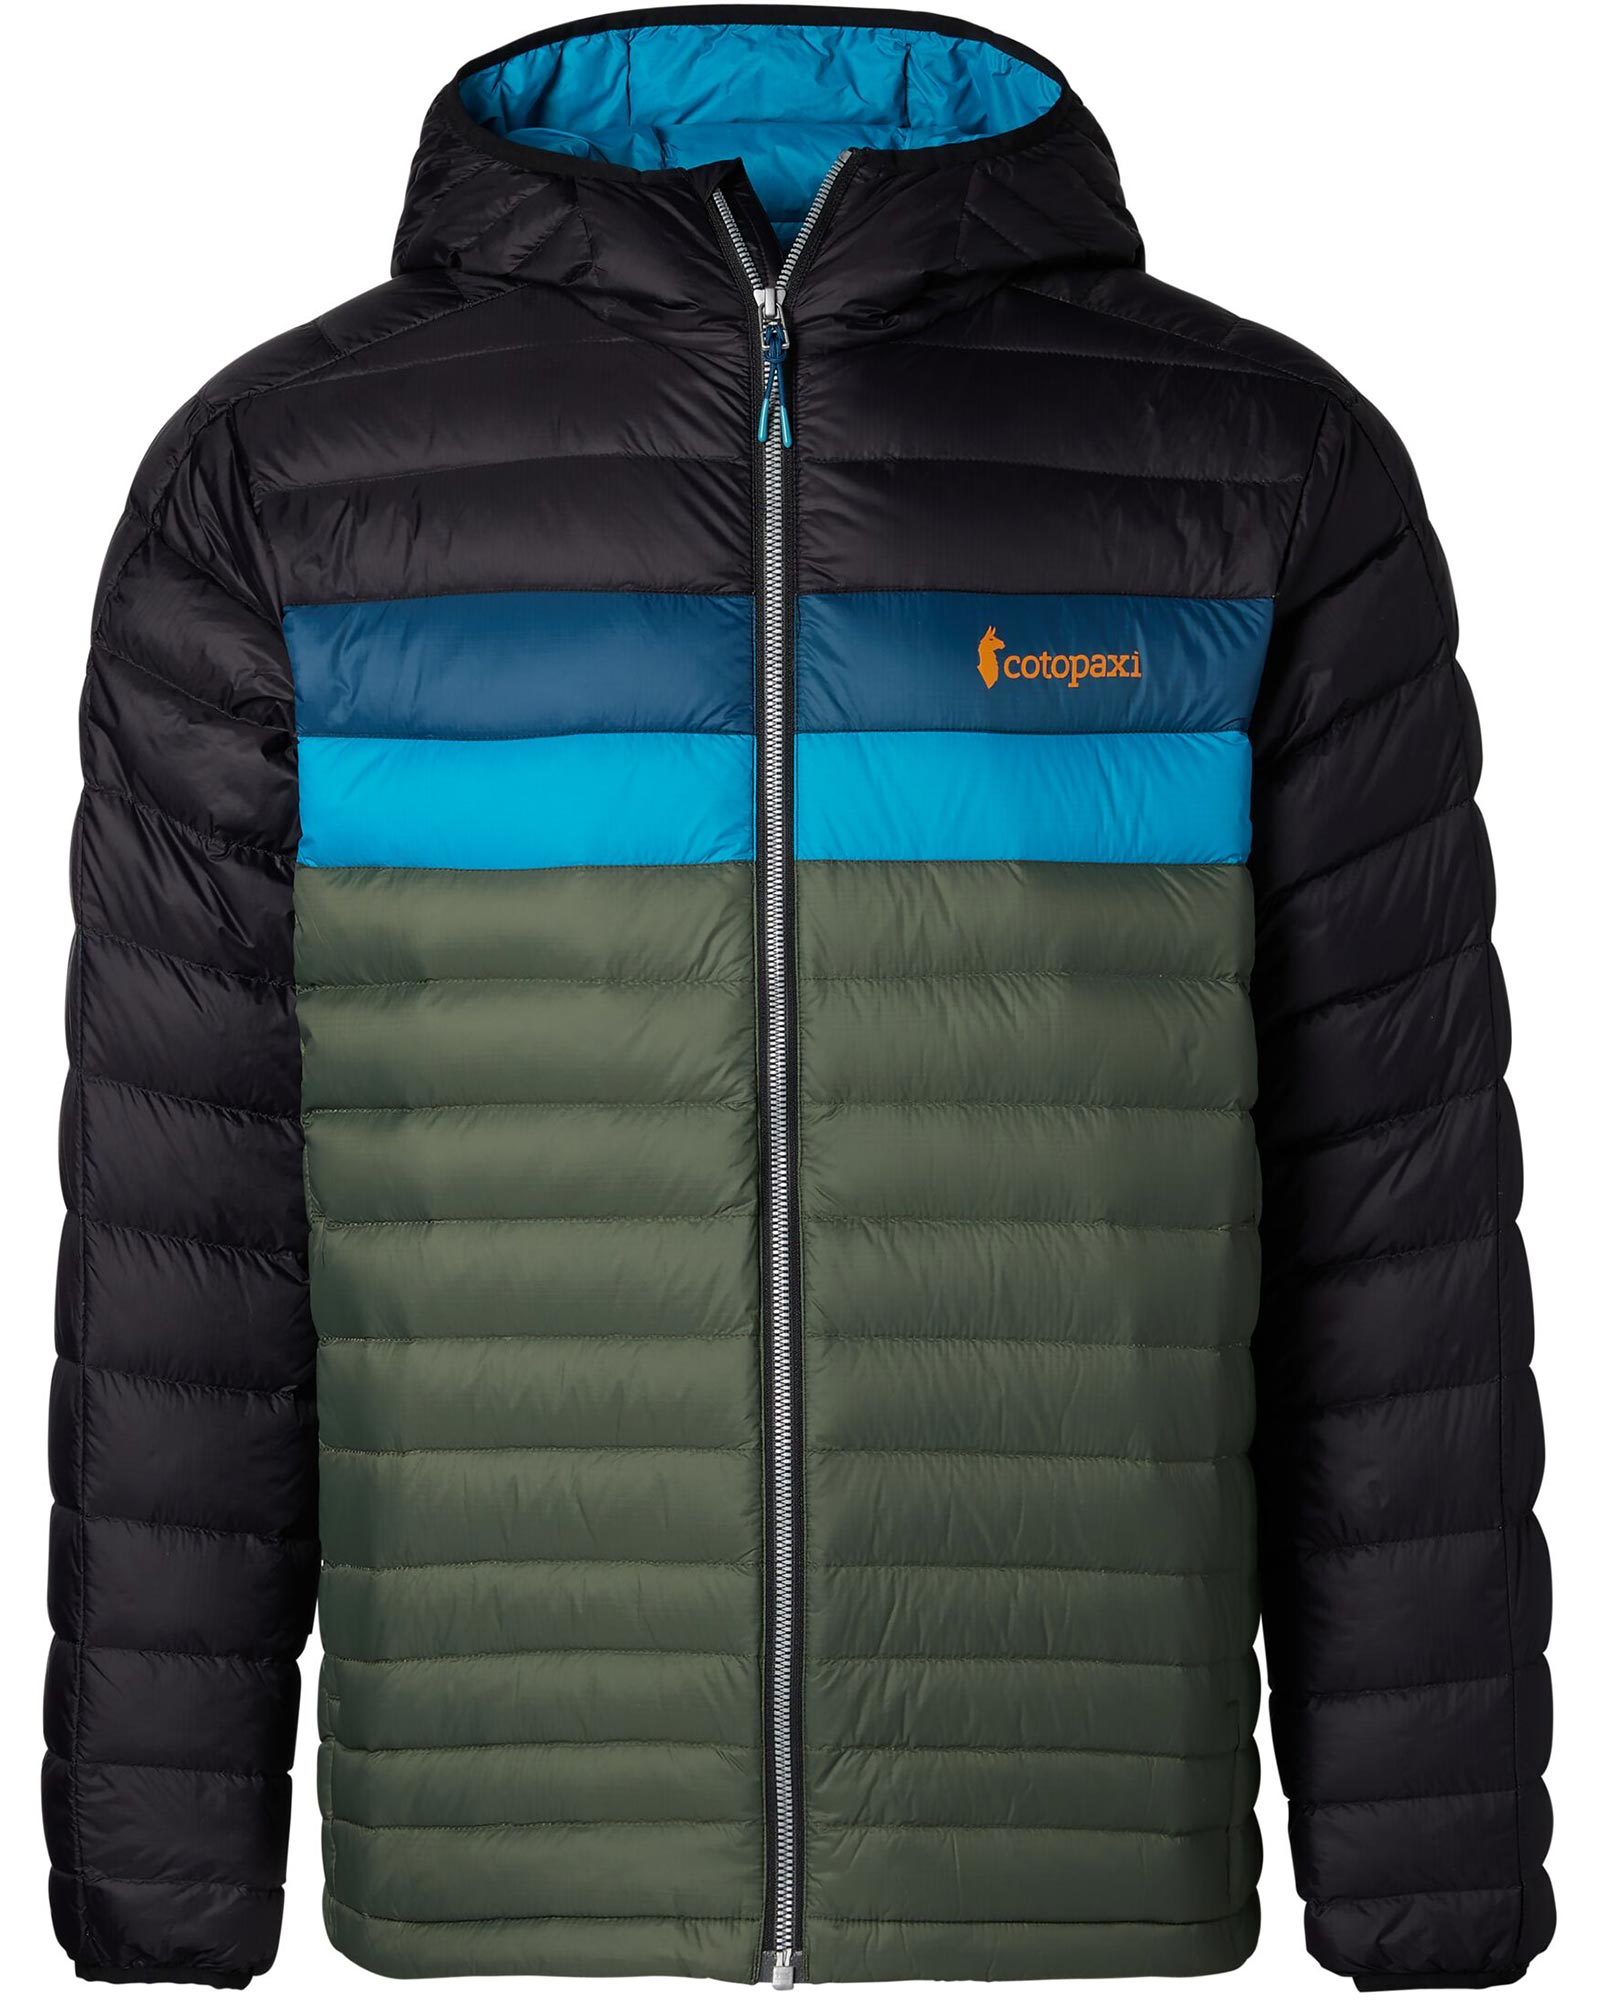 Cotopaxi Fuego Hooded Men’s Down Jacket - Black/Spruce M